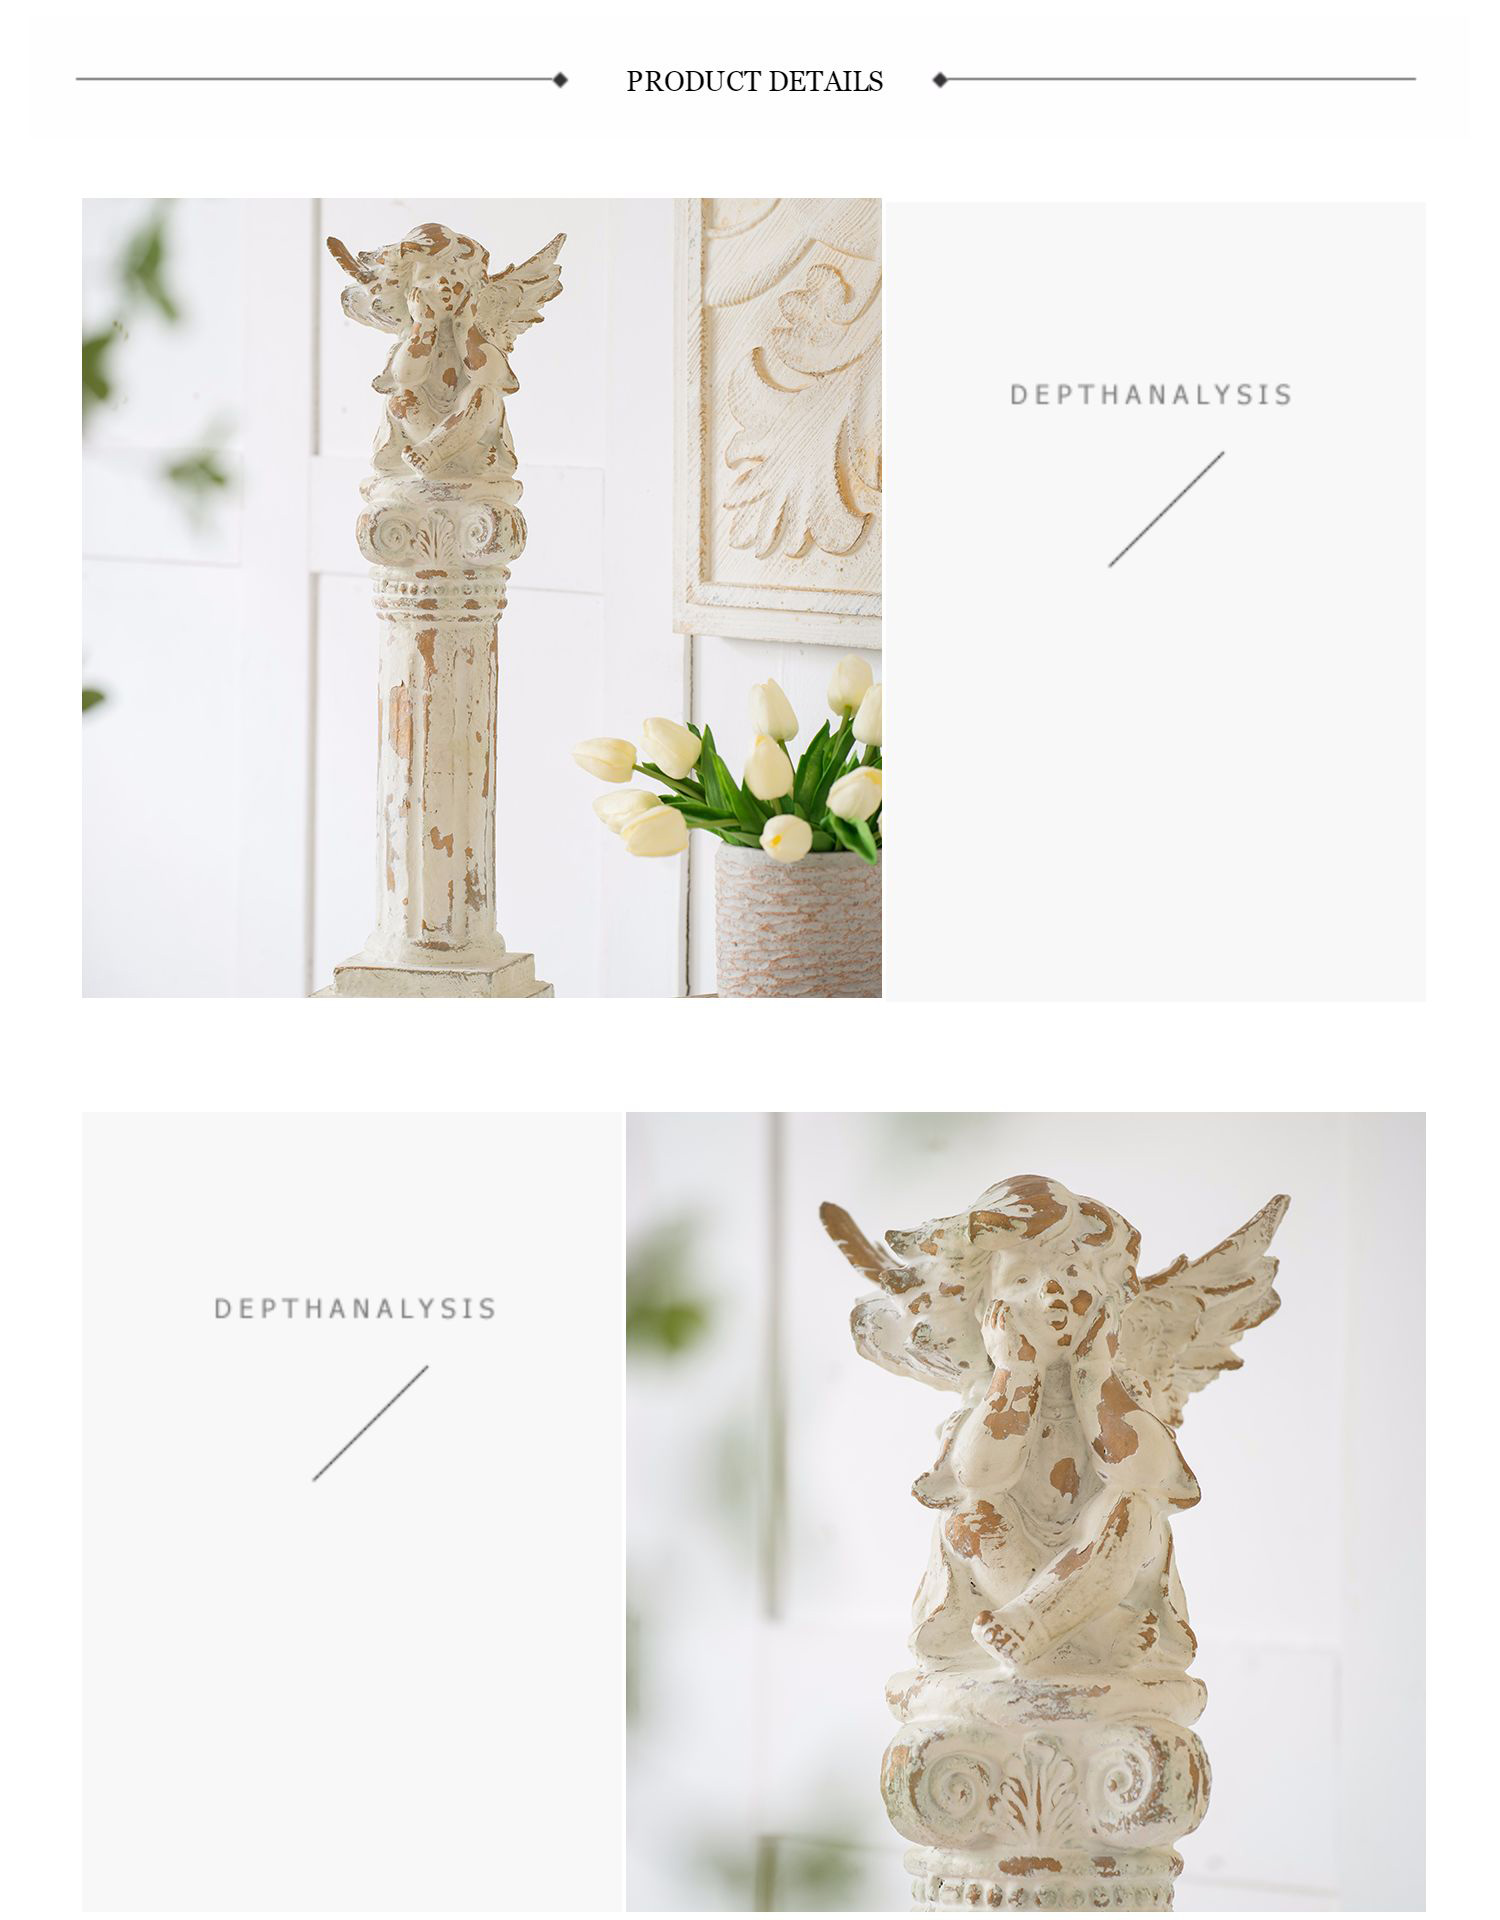 Home Garden Decoration Accessories Angel Boy Sitting On Roman Column Think Figurine Living Room Ornament Objects Sculpture Gifts